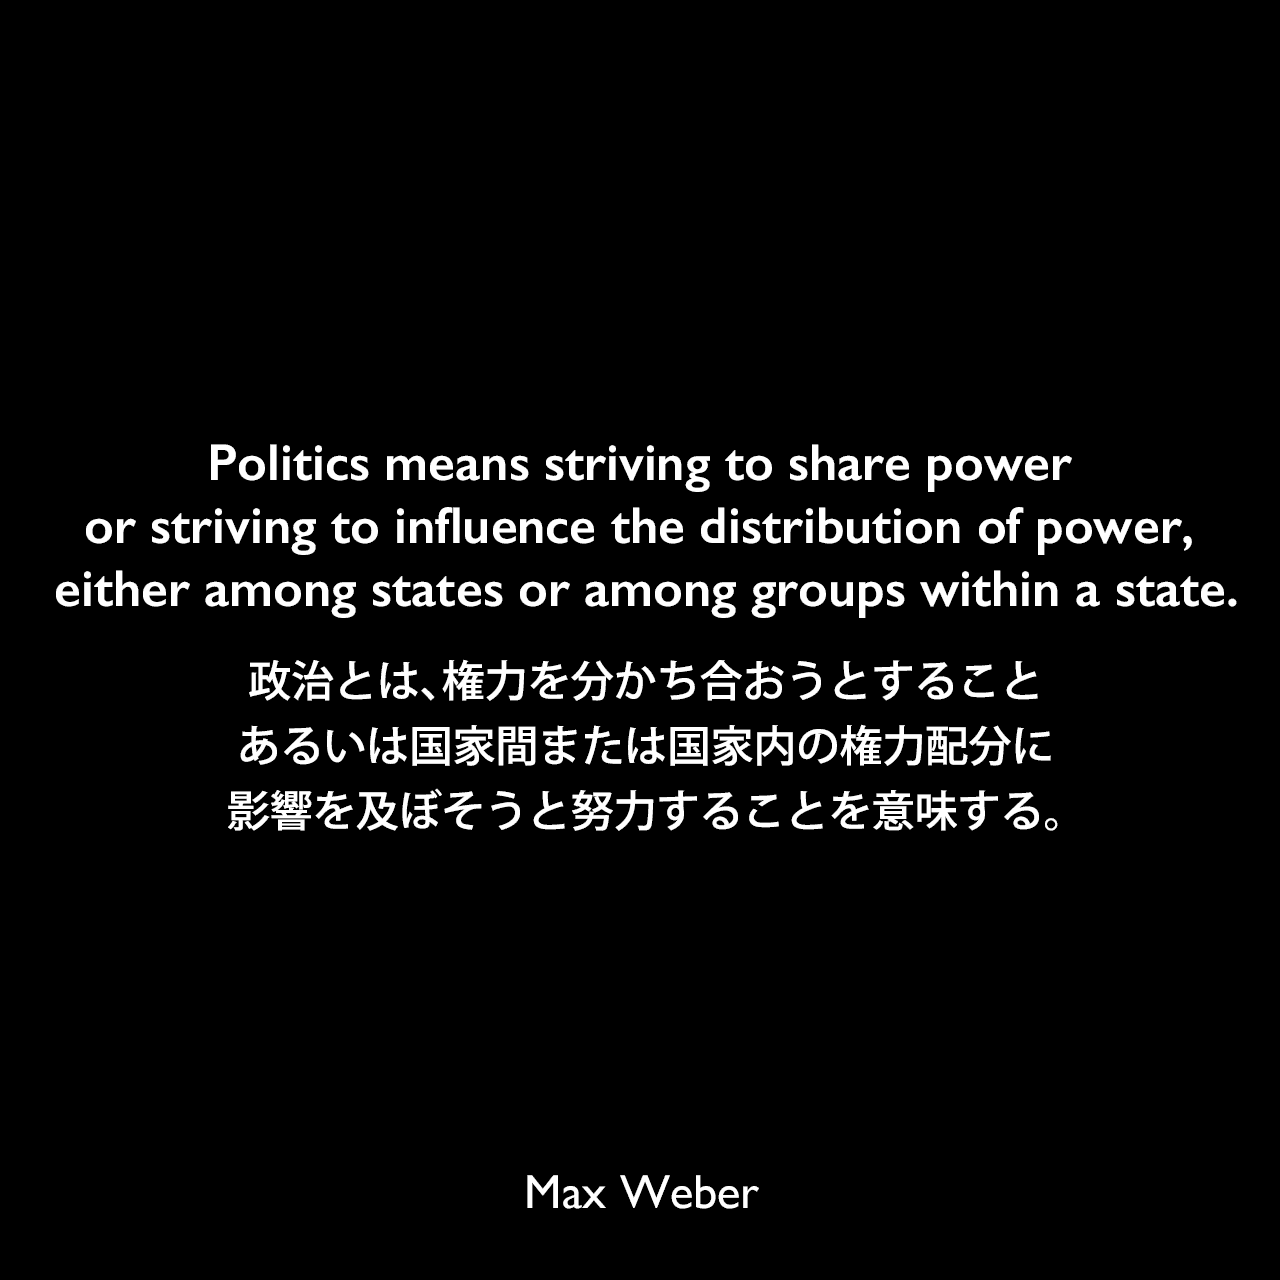 Politics means striving to share power or striving to influence the distribution of power, either among states or among groups within a state.政治とは、権力を分かち合おうとすること、あるいは国家間または国家内の権力配分に影響を及ぼそうと努力することを意味する。Max Weber